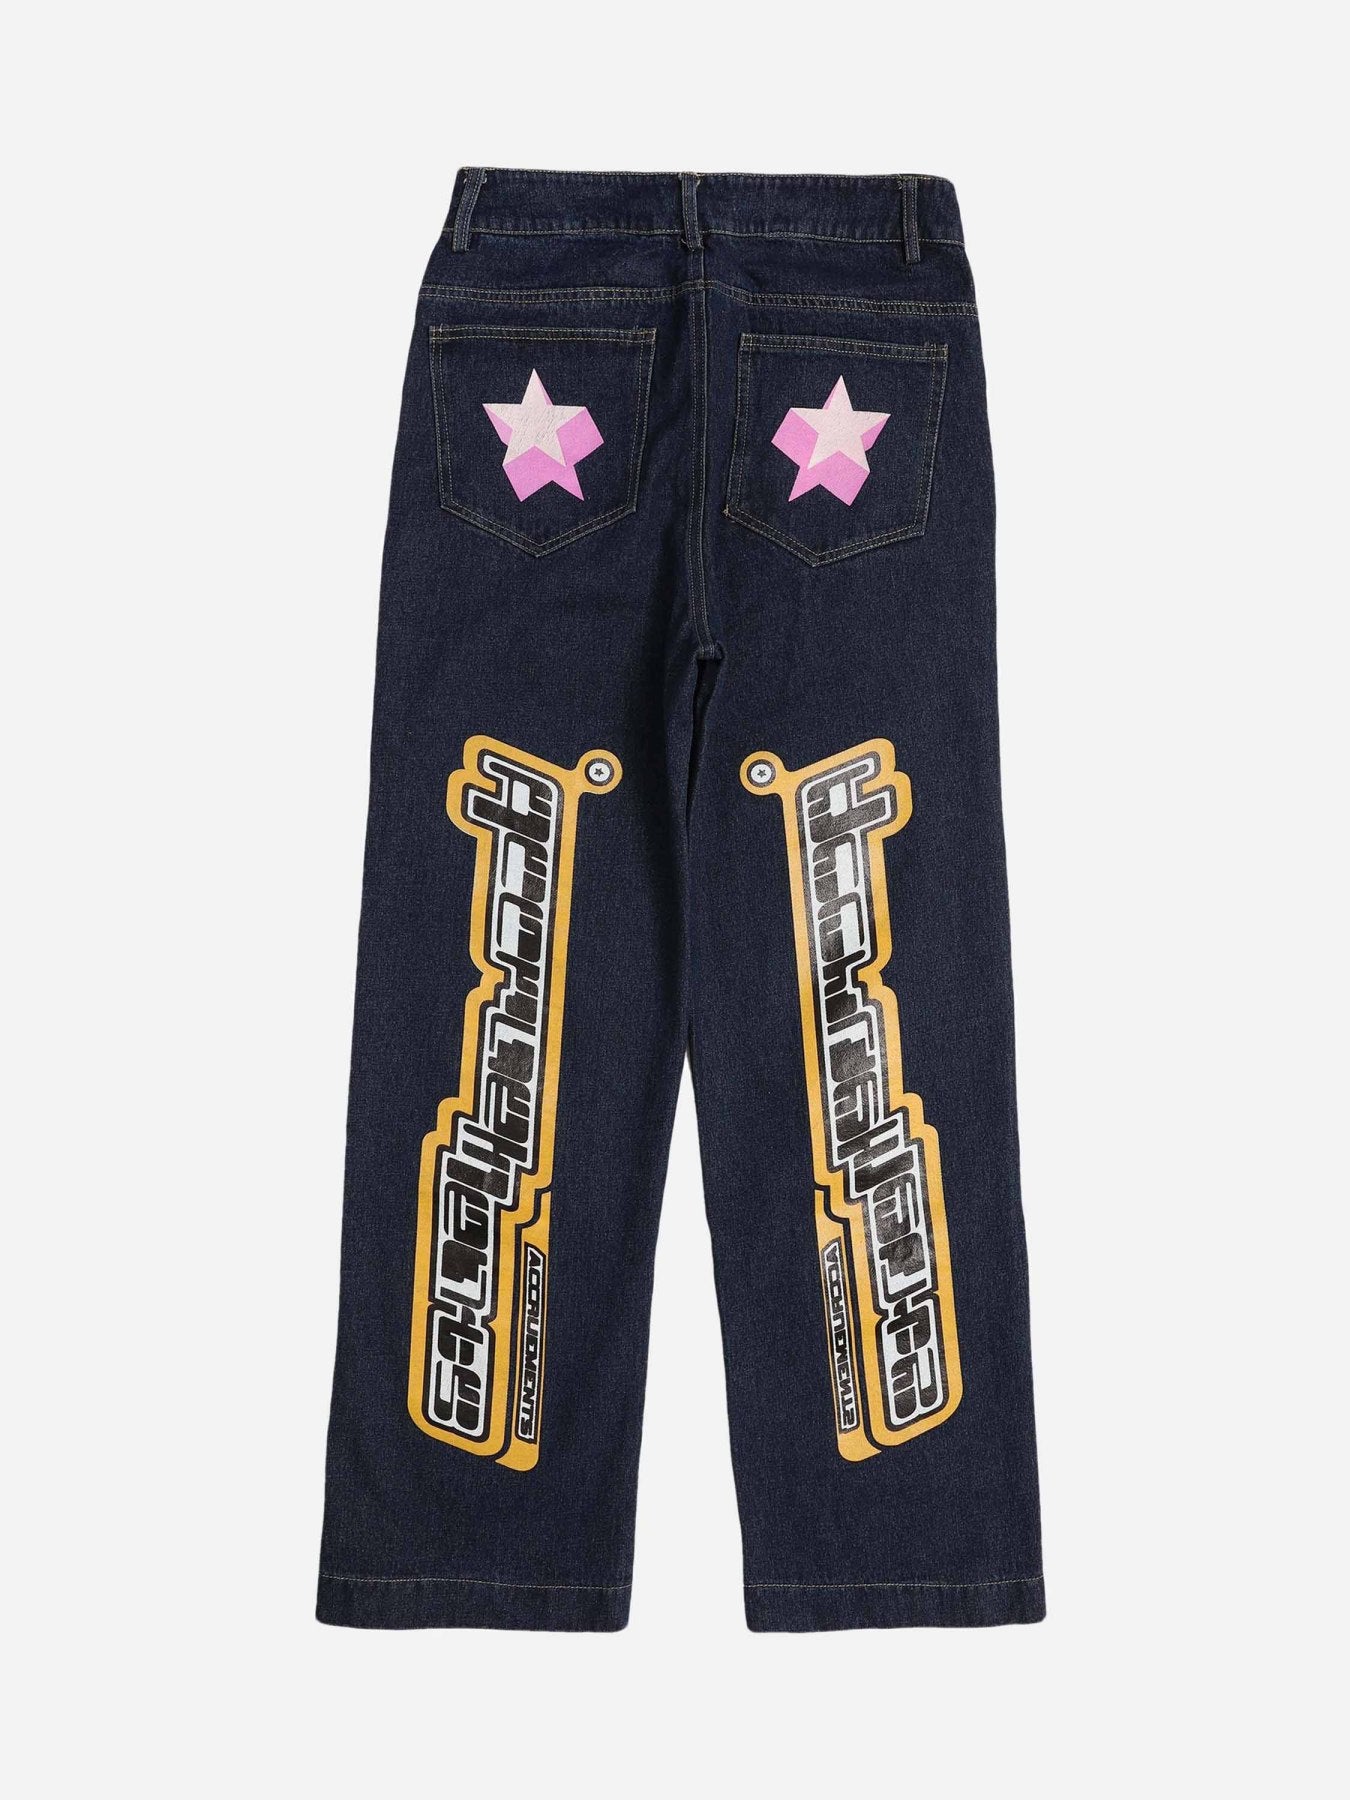 The Supermade Star Letter Print Jeans